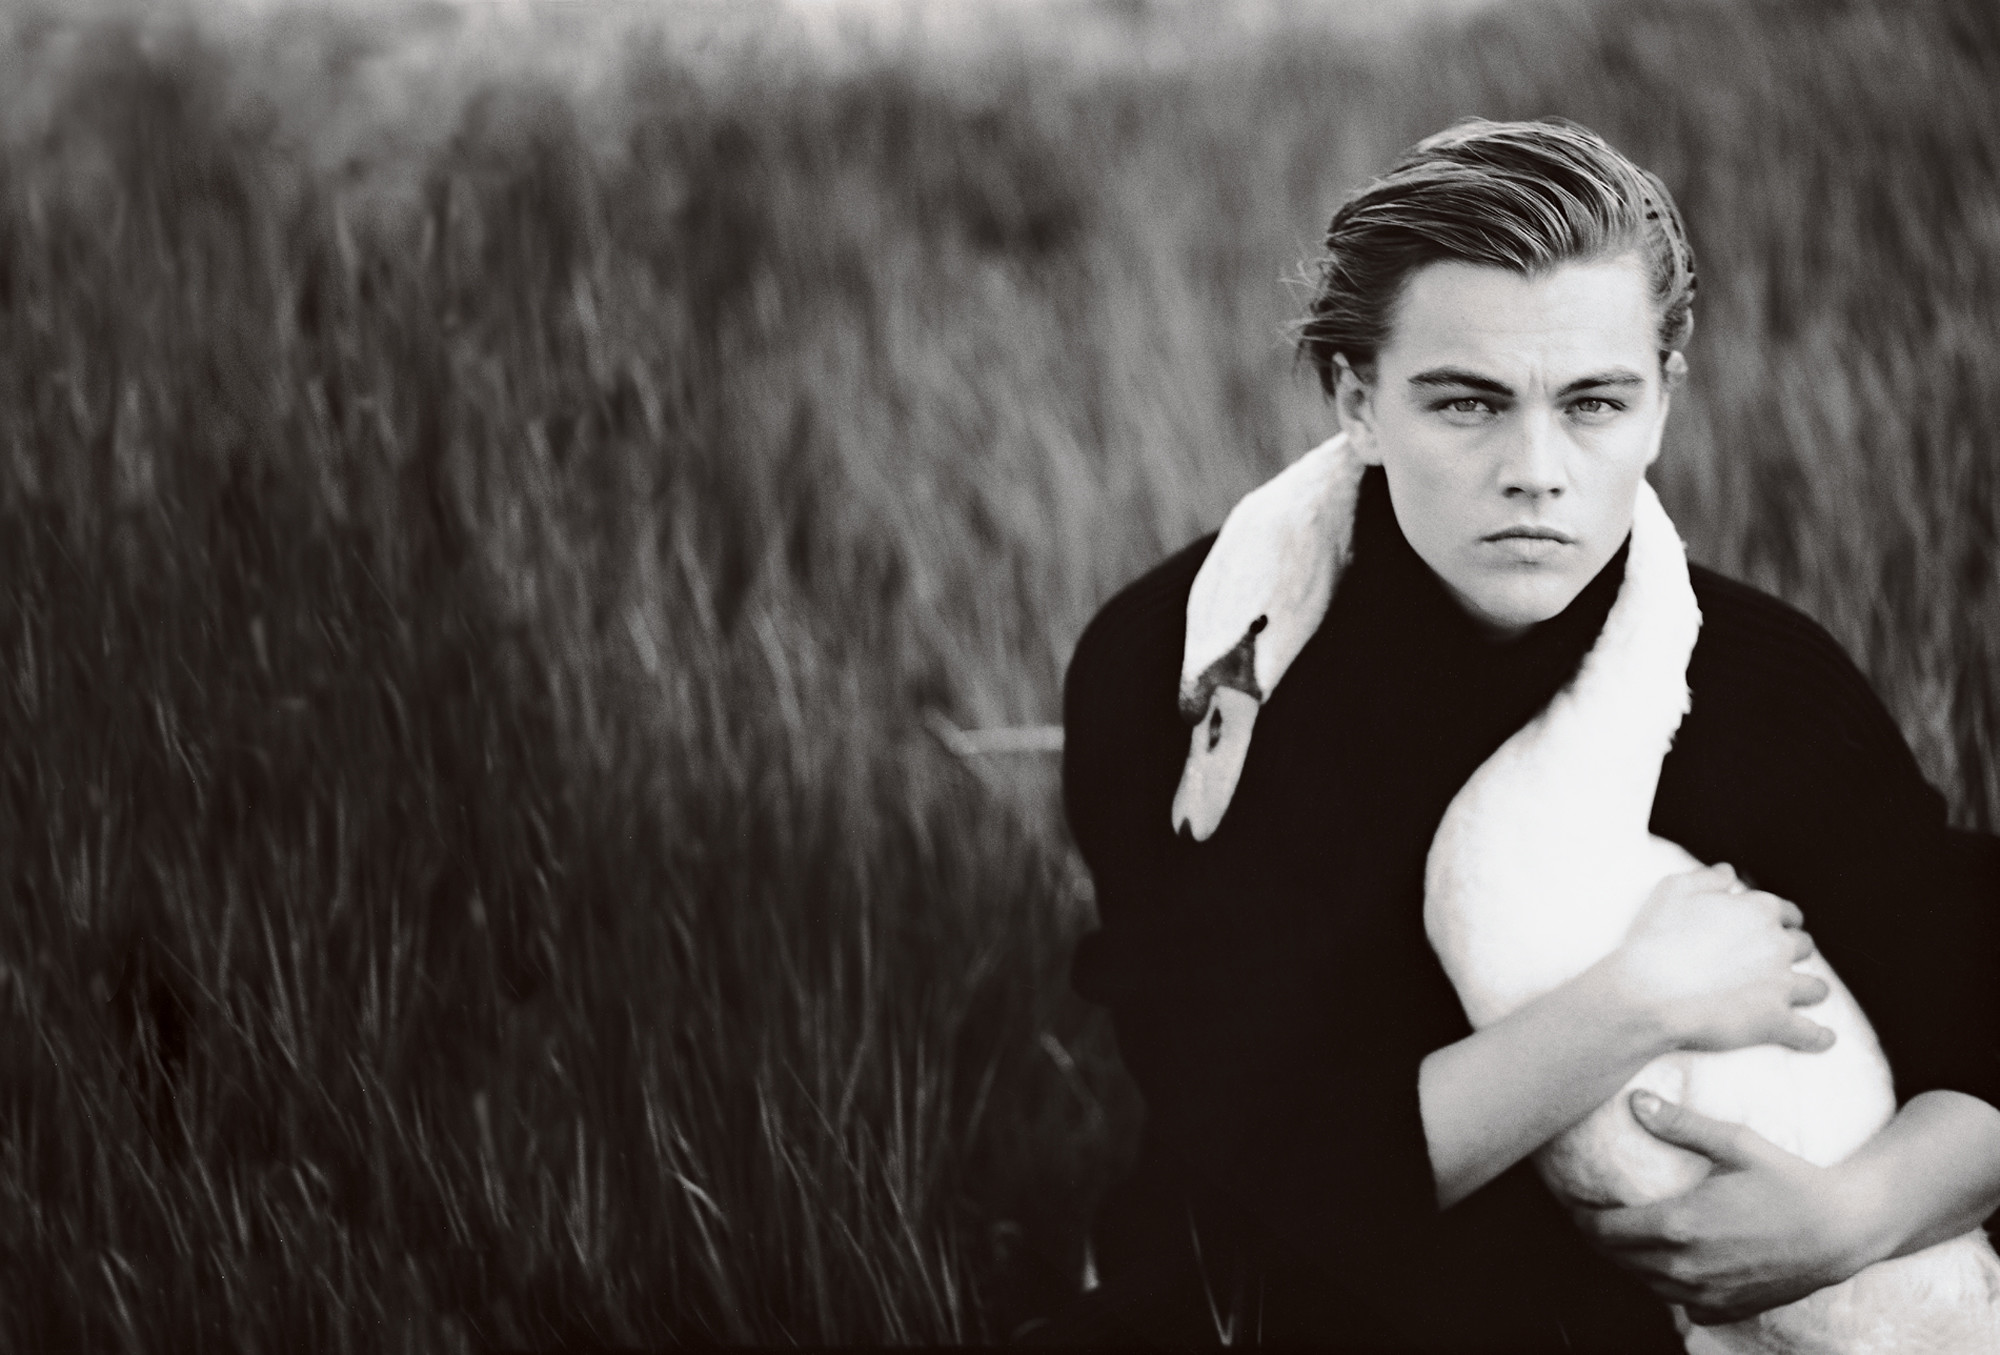 young leonardo dicaprio wallpaper,people in nature,photograph,black and white,monochrome photography,portrait